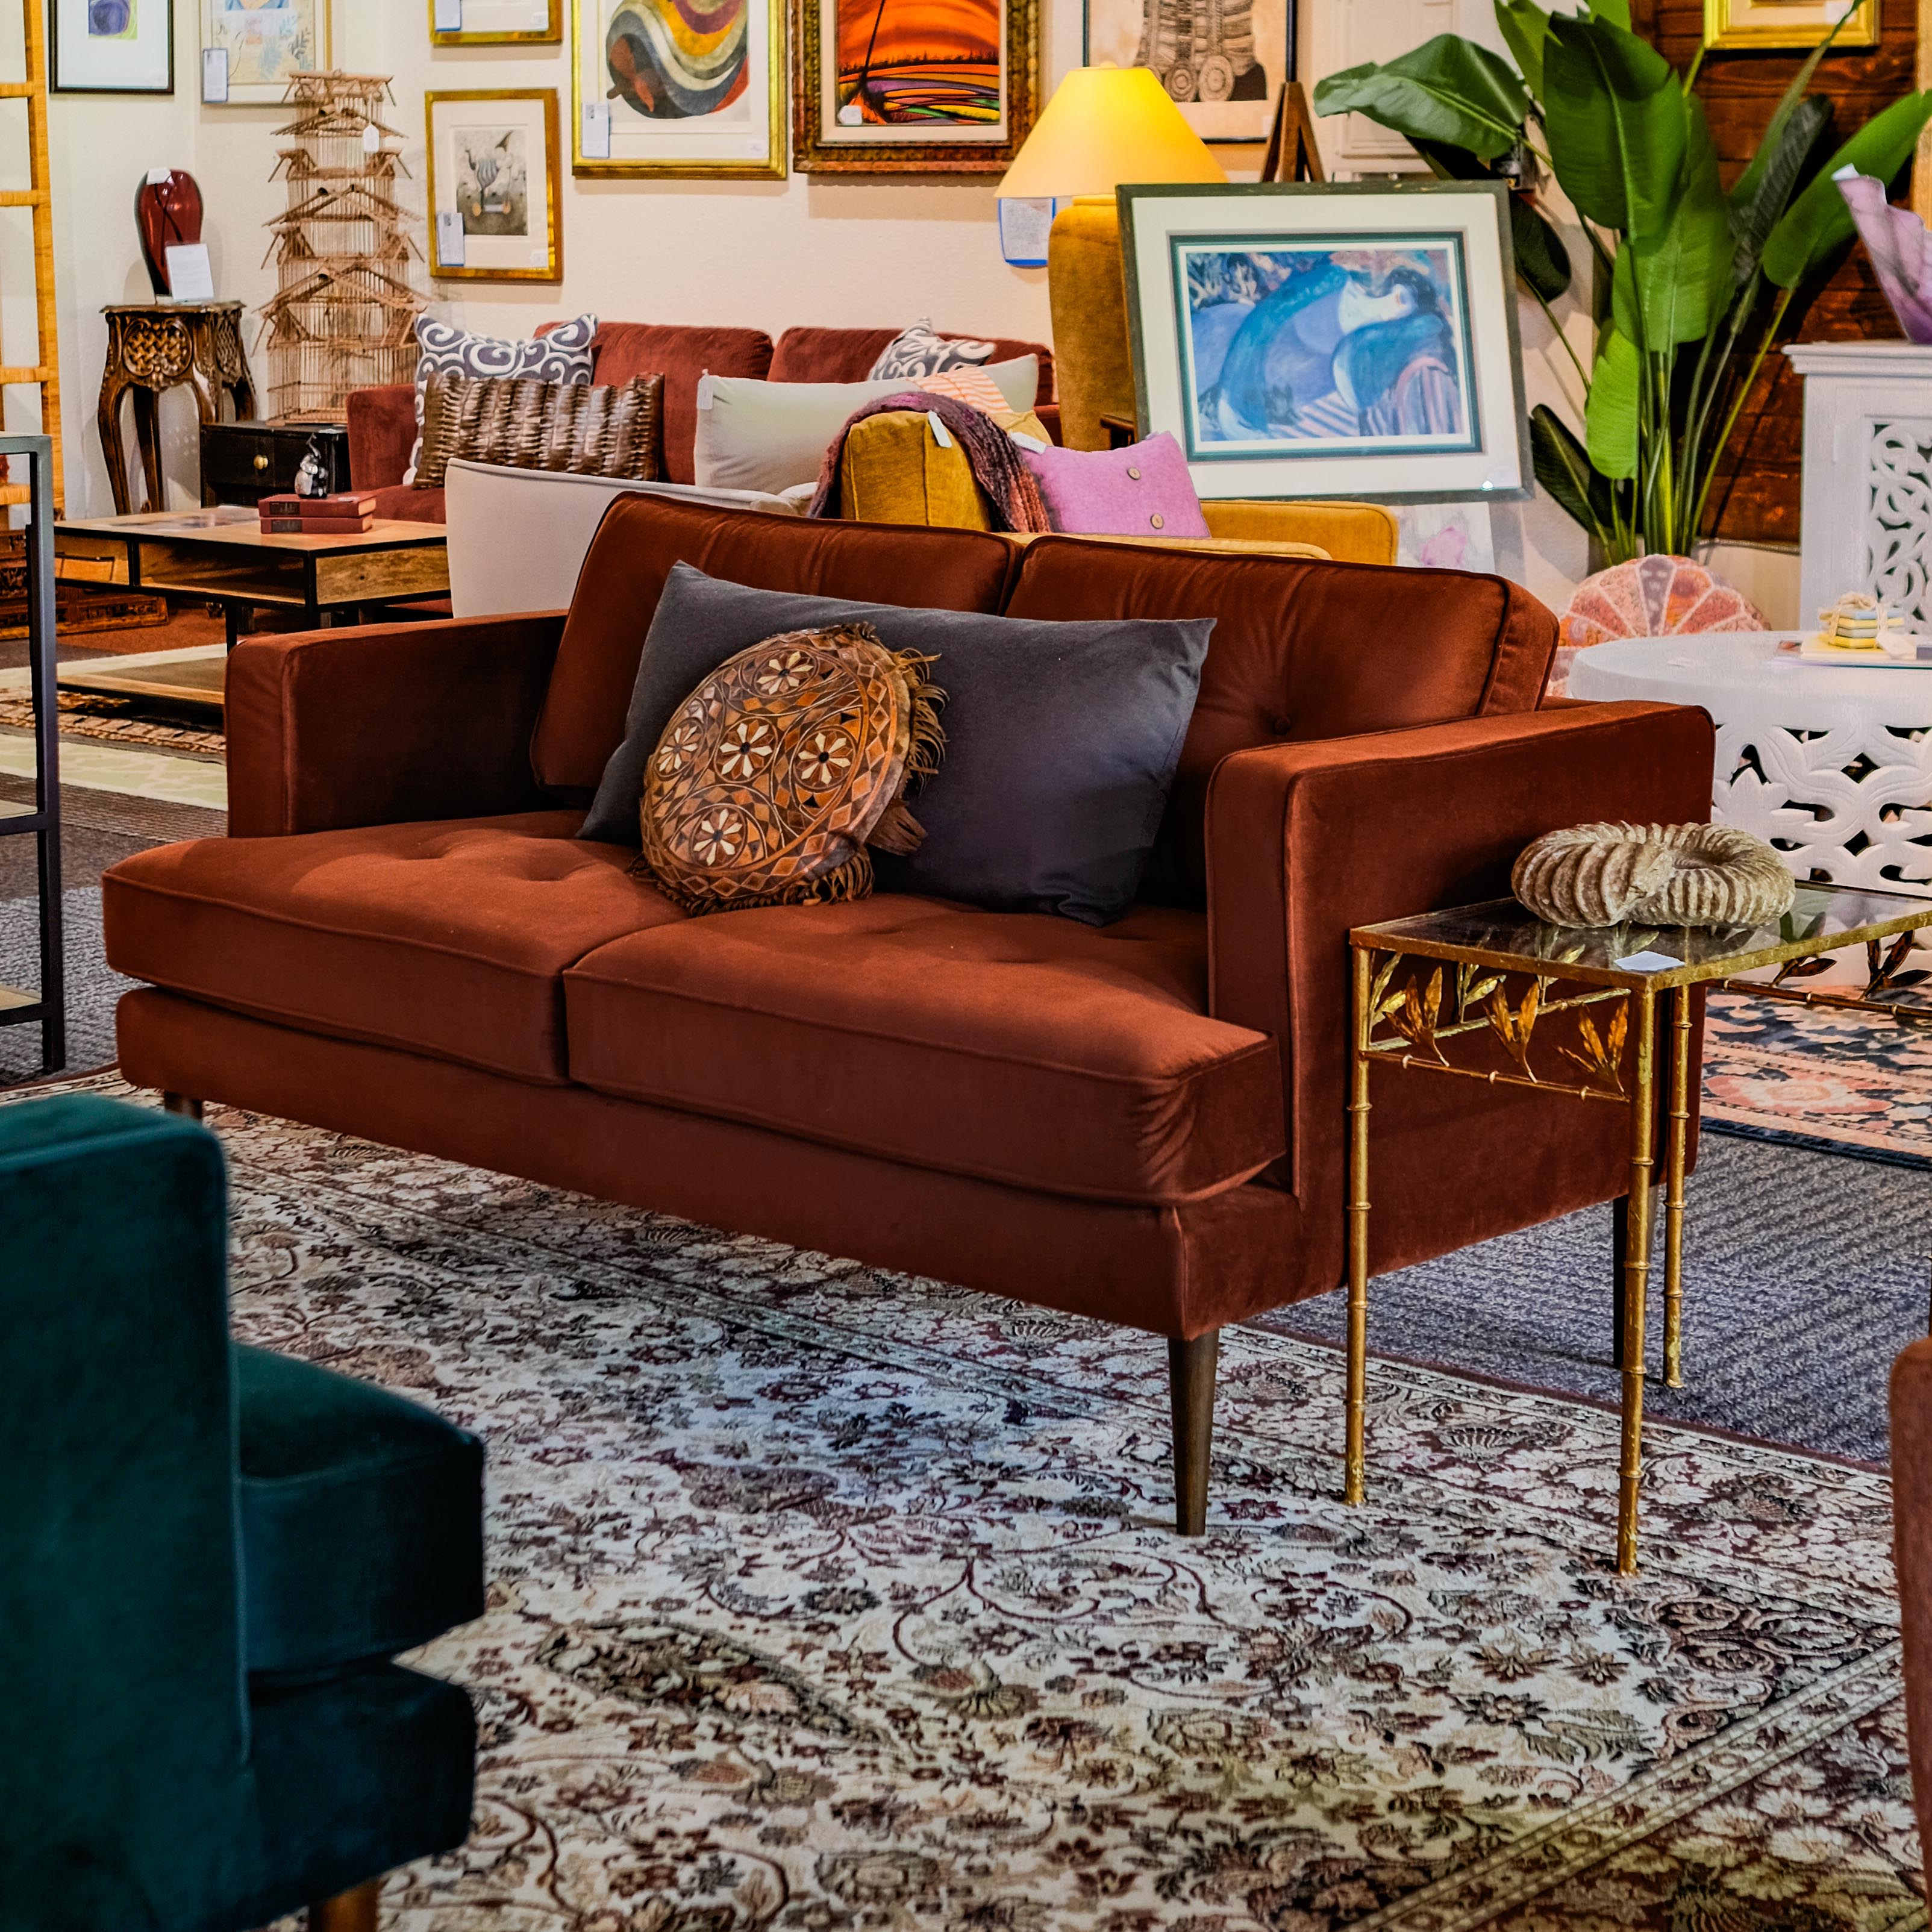 A cozy, rust-colored velvet loveseat adorned with decorative cushions in an eclectic living room setup. The space is filled with a mix of contemporary and vintage furniture, artwork, and vibrant decor items, creating a warm and inviting atmosphere.